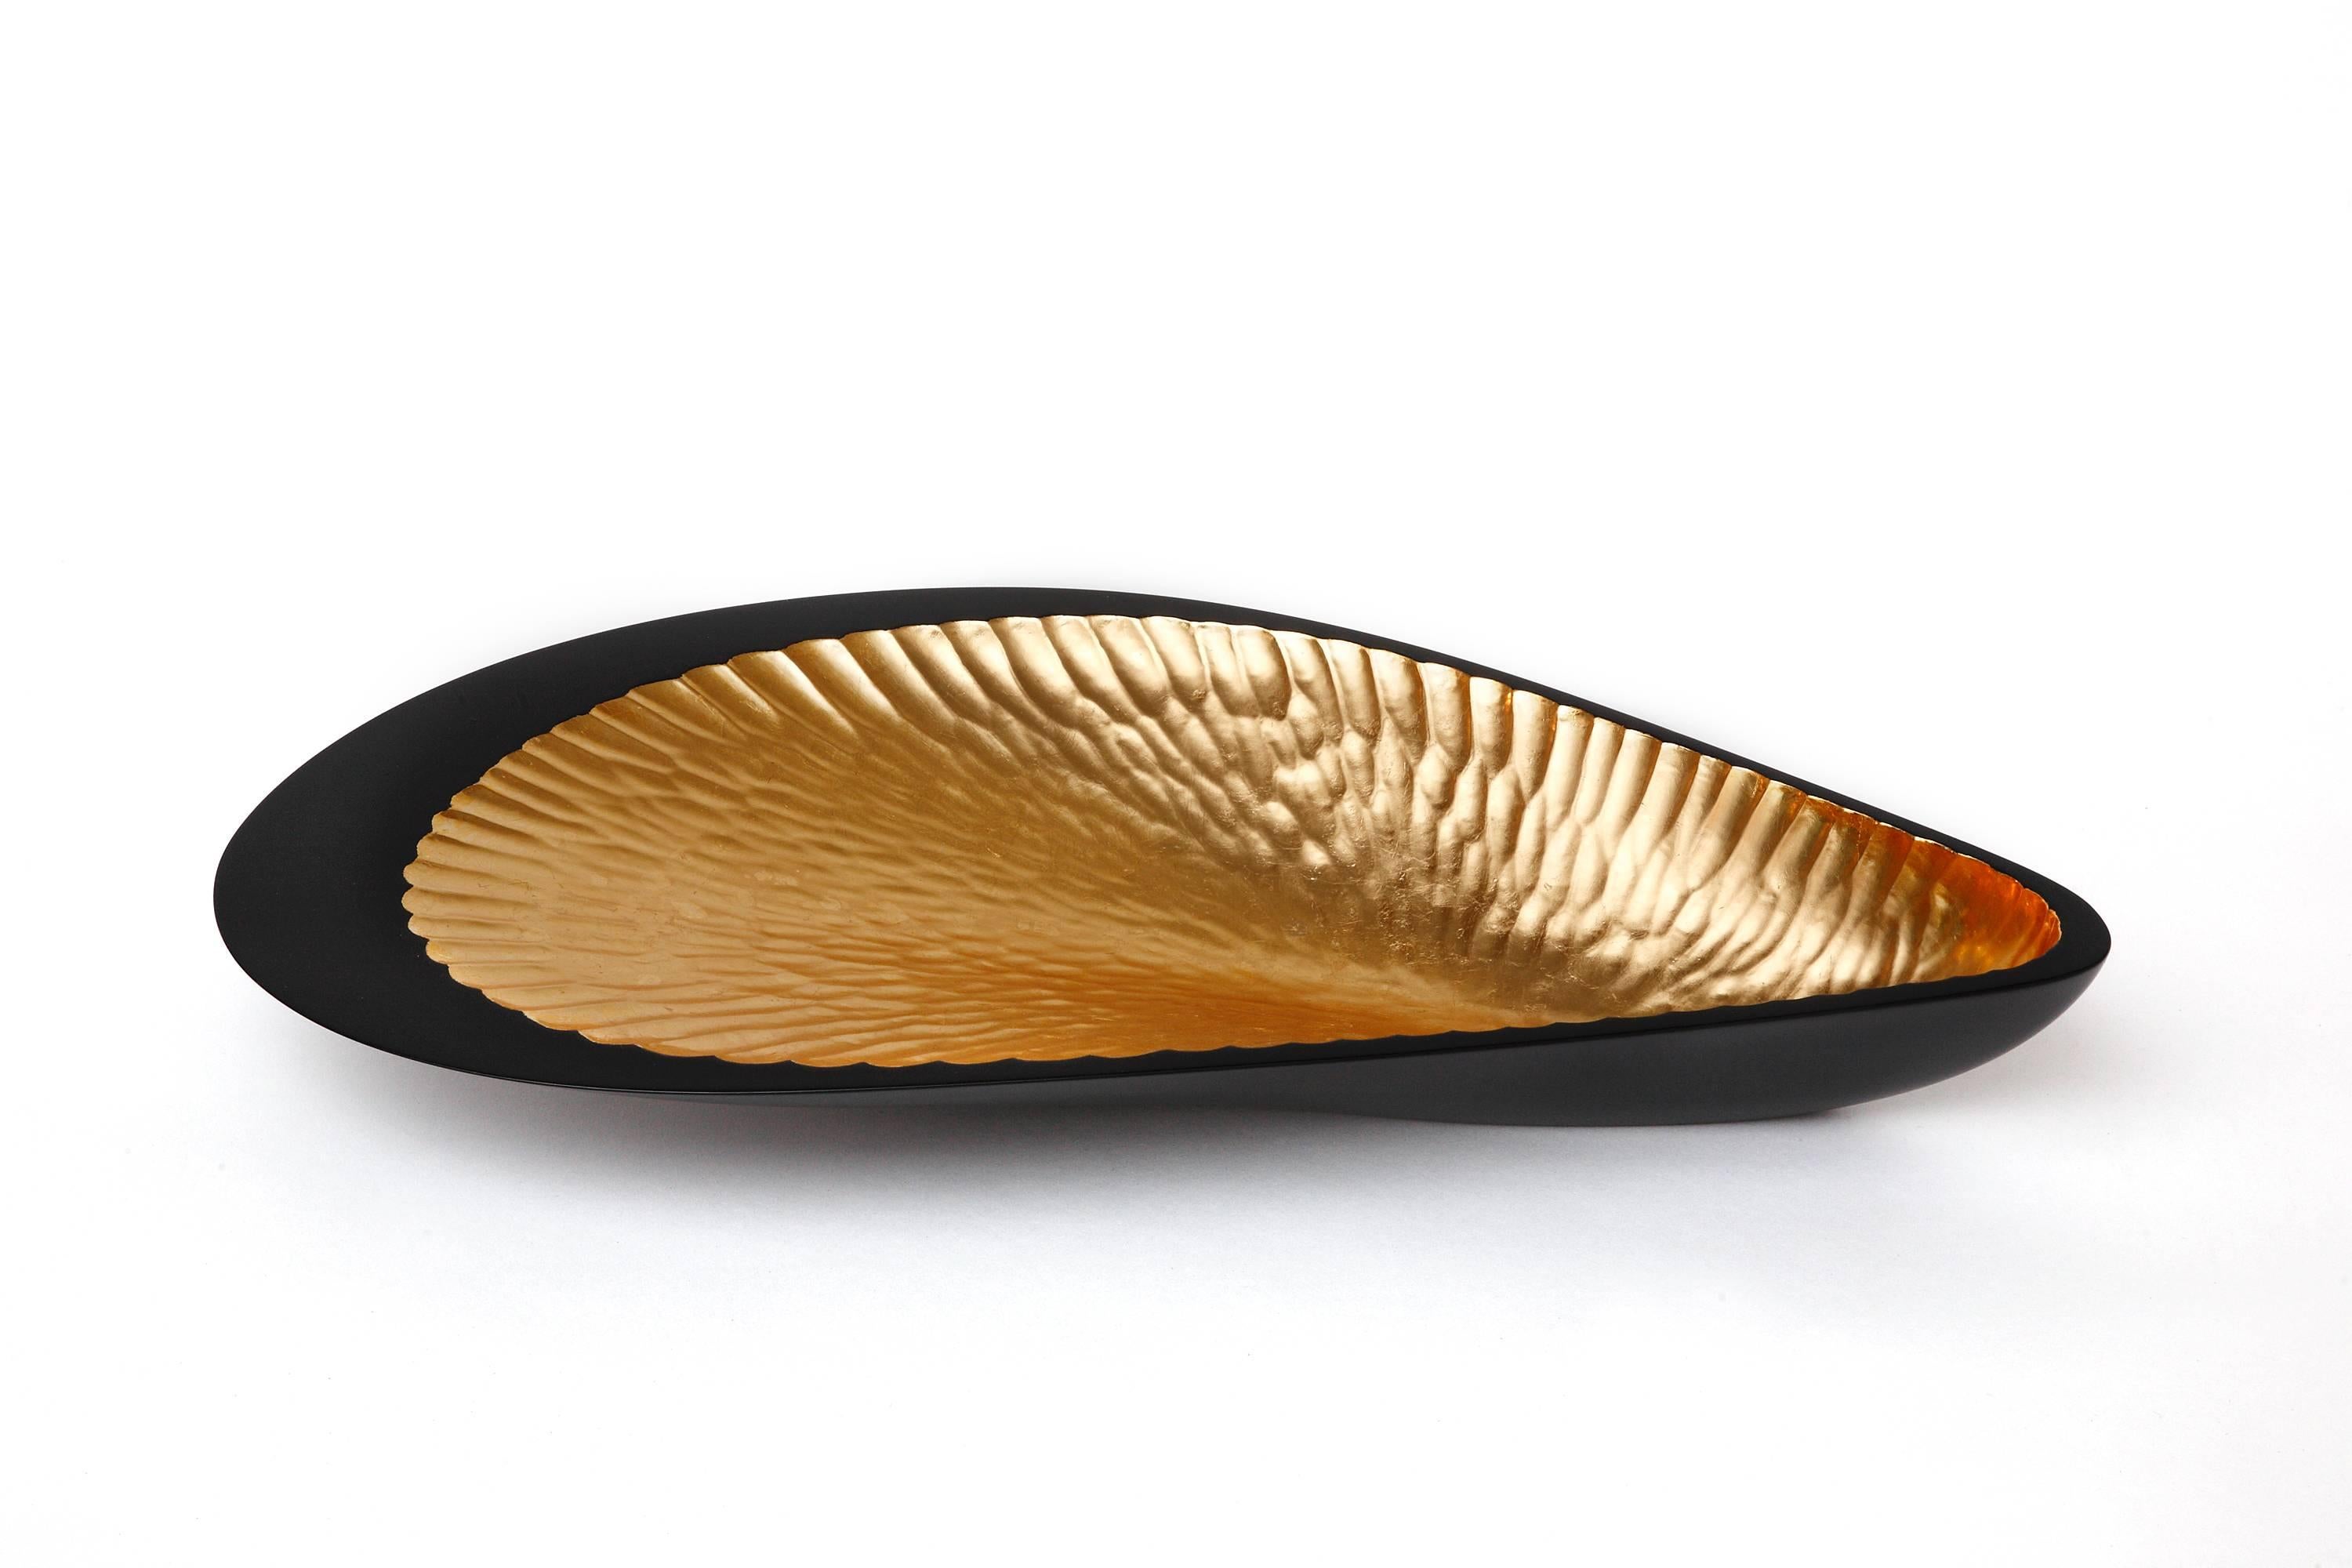 Decorative art piece by Dominique Pierrat. Hand-carved and lacquered on the outside, gilded on the inside.